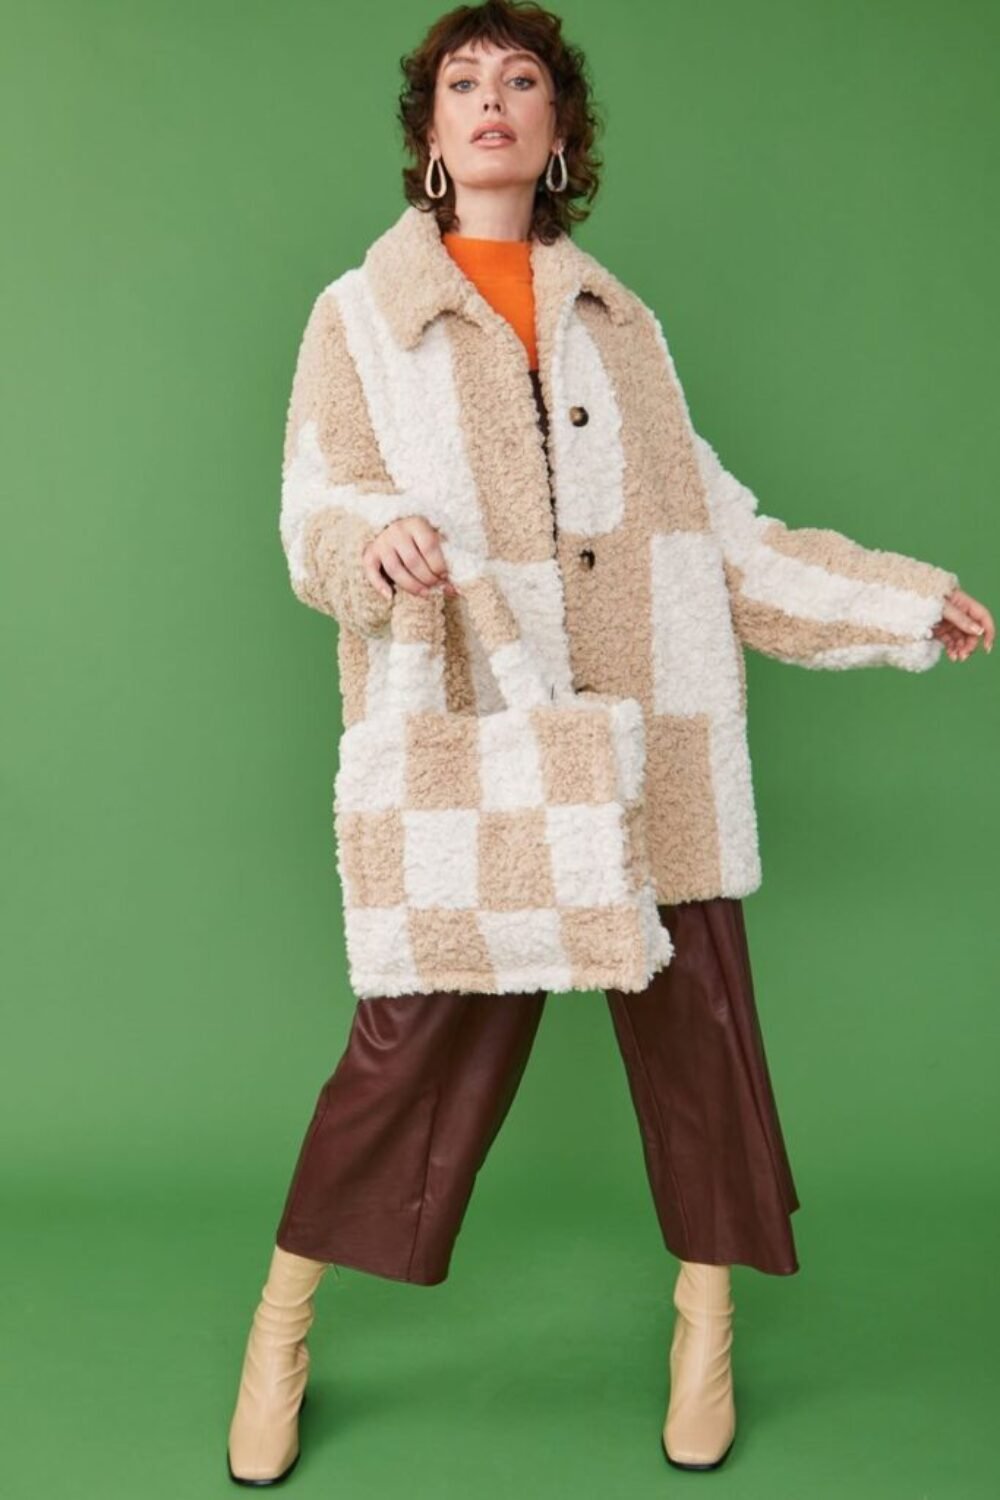 Shop Lux Oversized Mocha and Cream Checkered Midi Coat and women's luxury and designer clothes at www.lux-apparel.co.uk